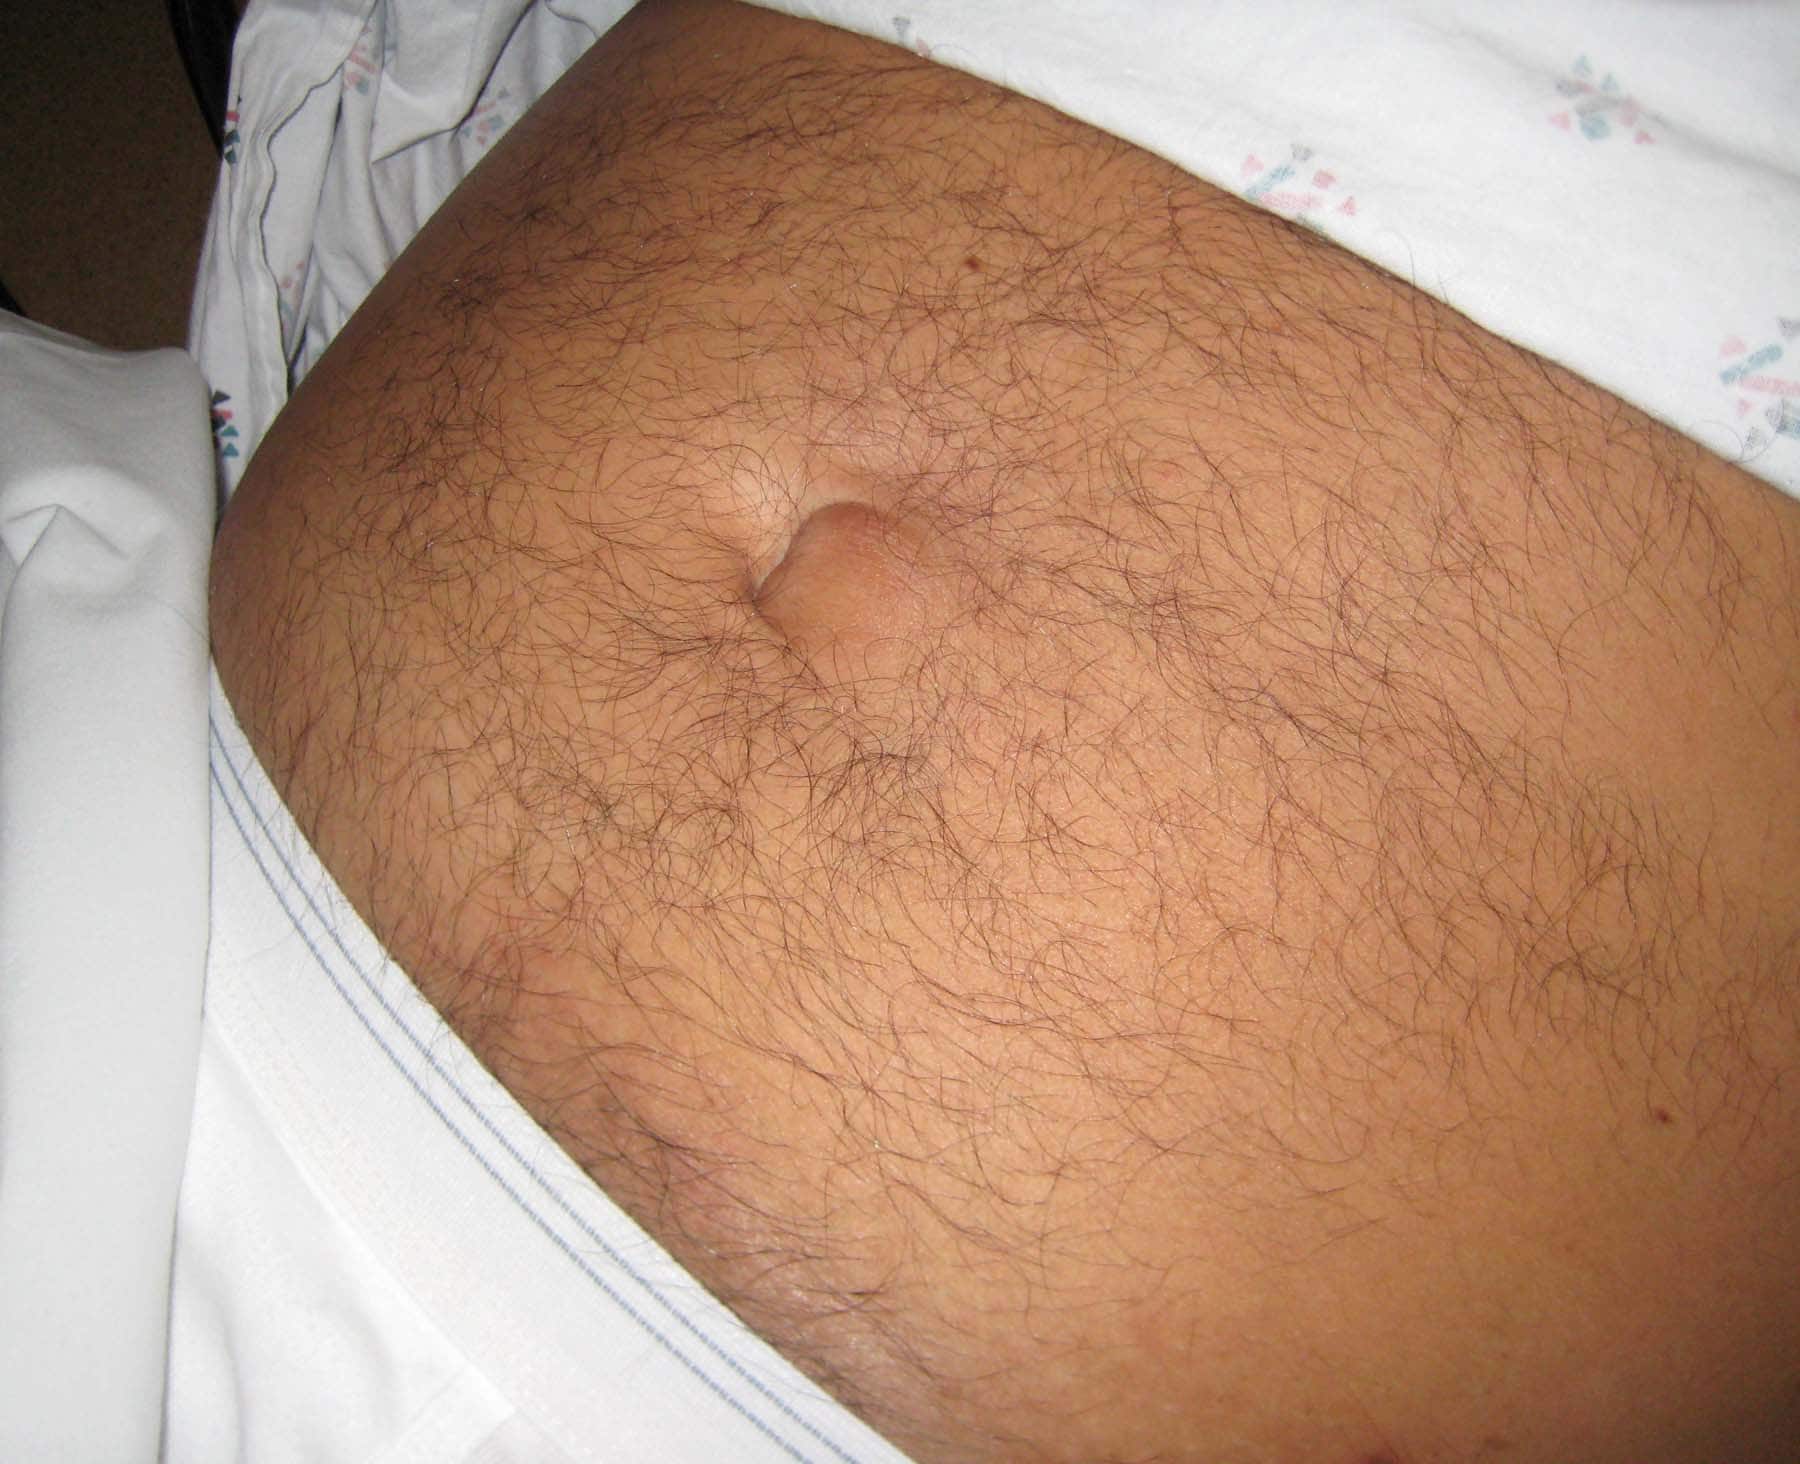 Adult Umbilical Hernia Pictures 55